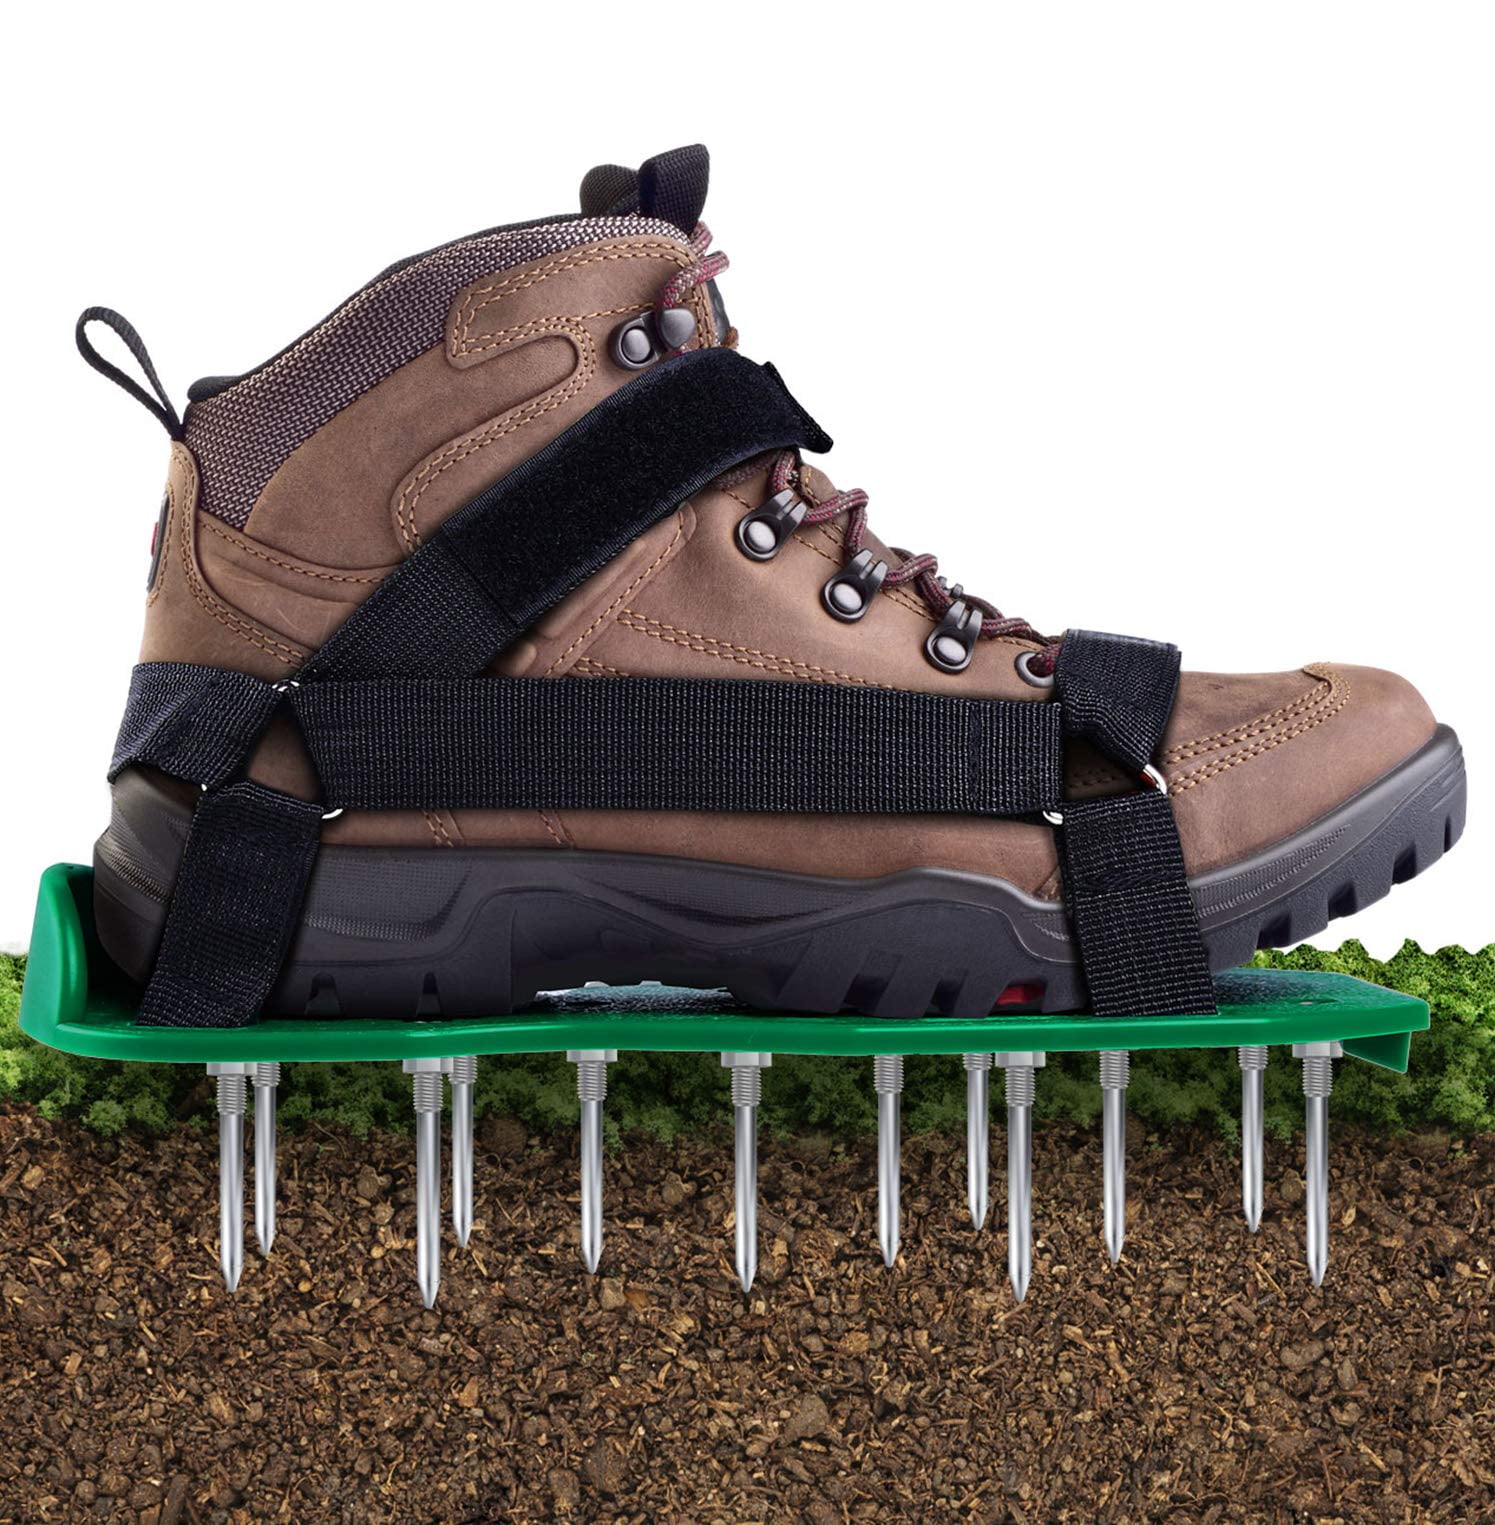 Lawn Aerator Aerating Shoes Sandals Spikes Buckles Shoe Garden Lawn Care 